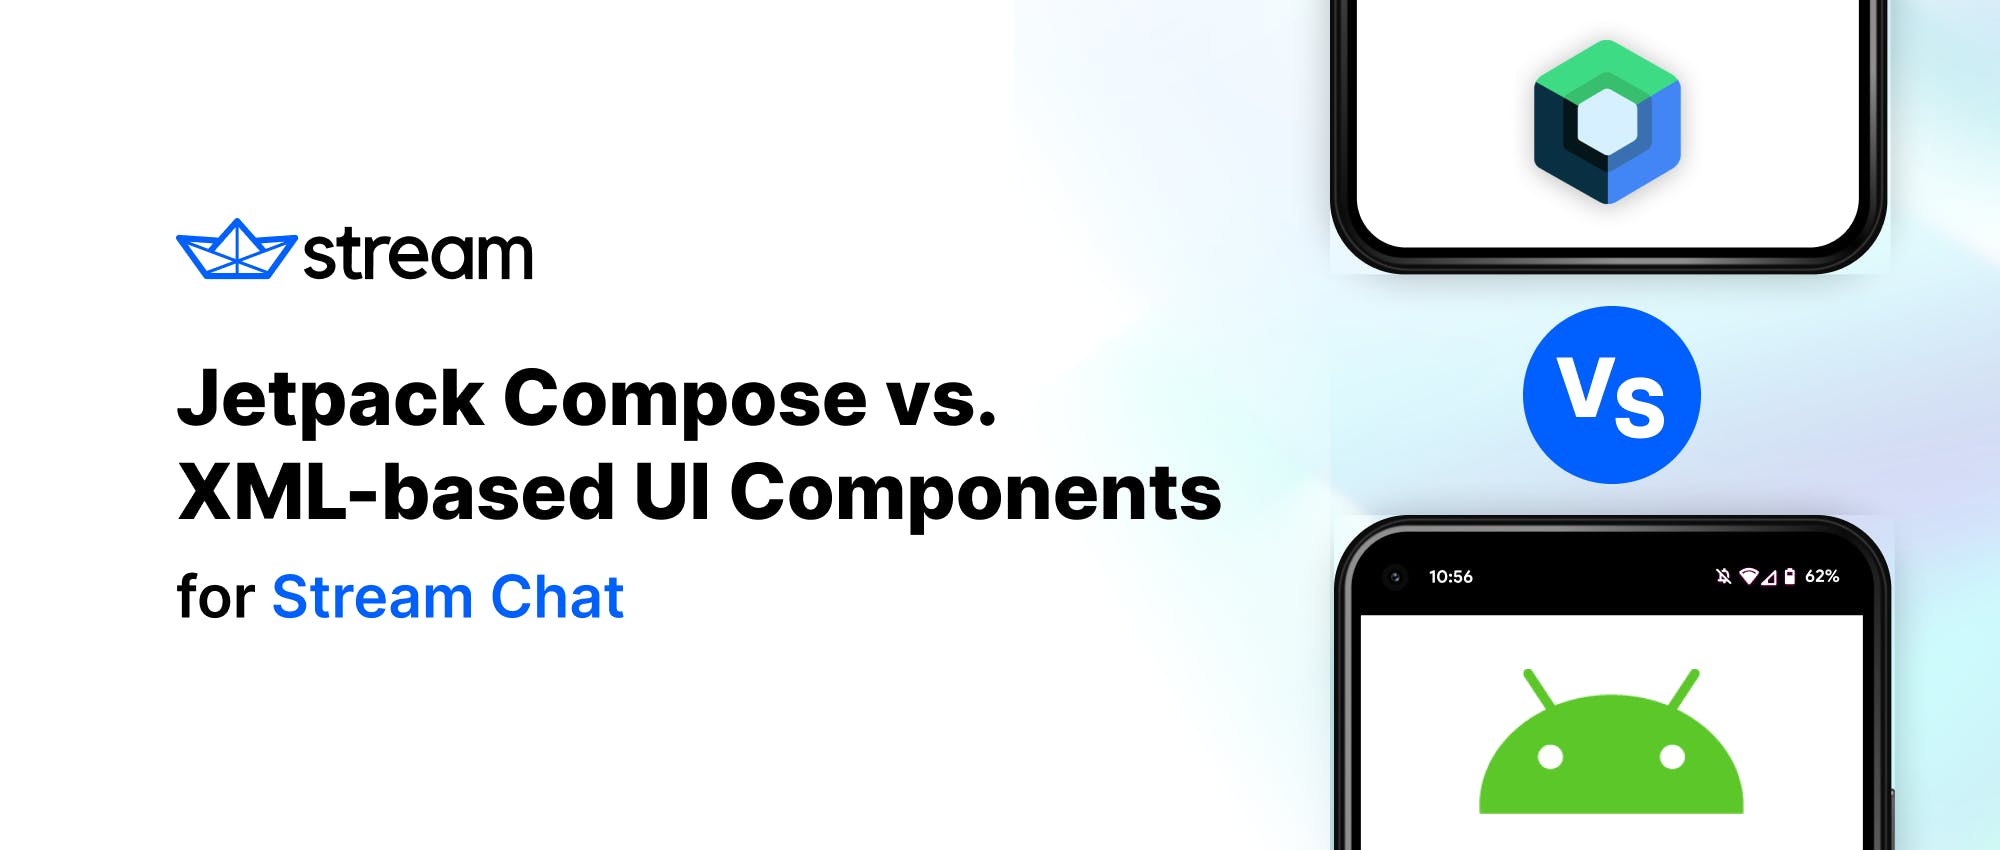 Stream's new Jetpack Compose library vs. the XML-based UI components library